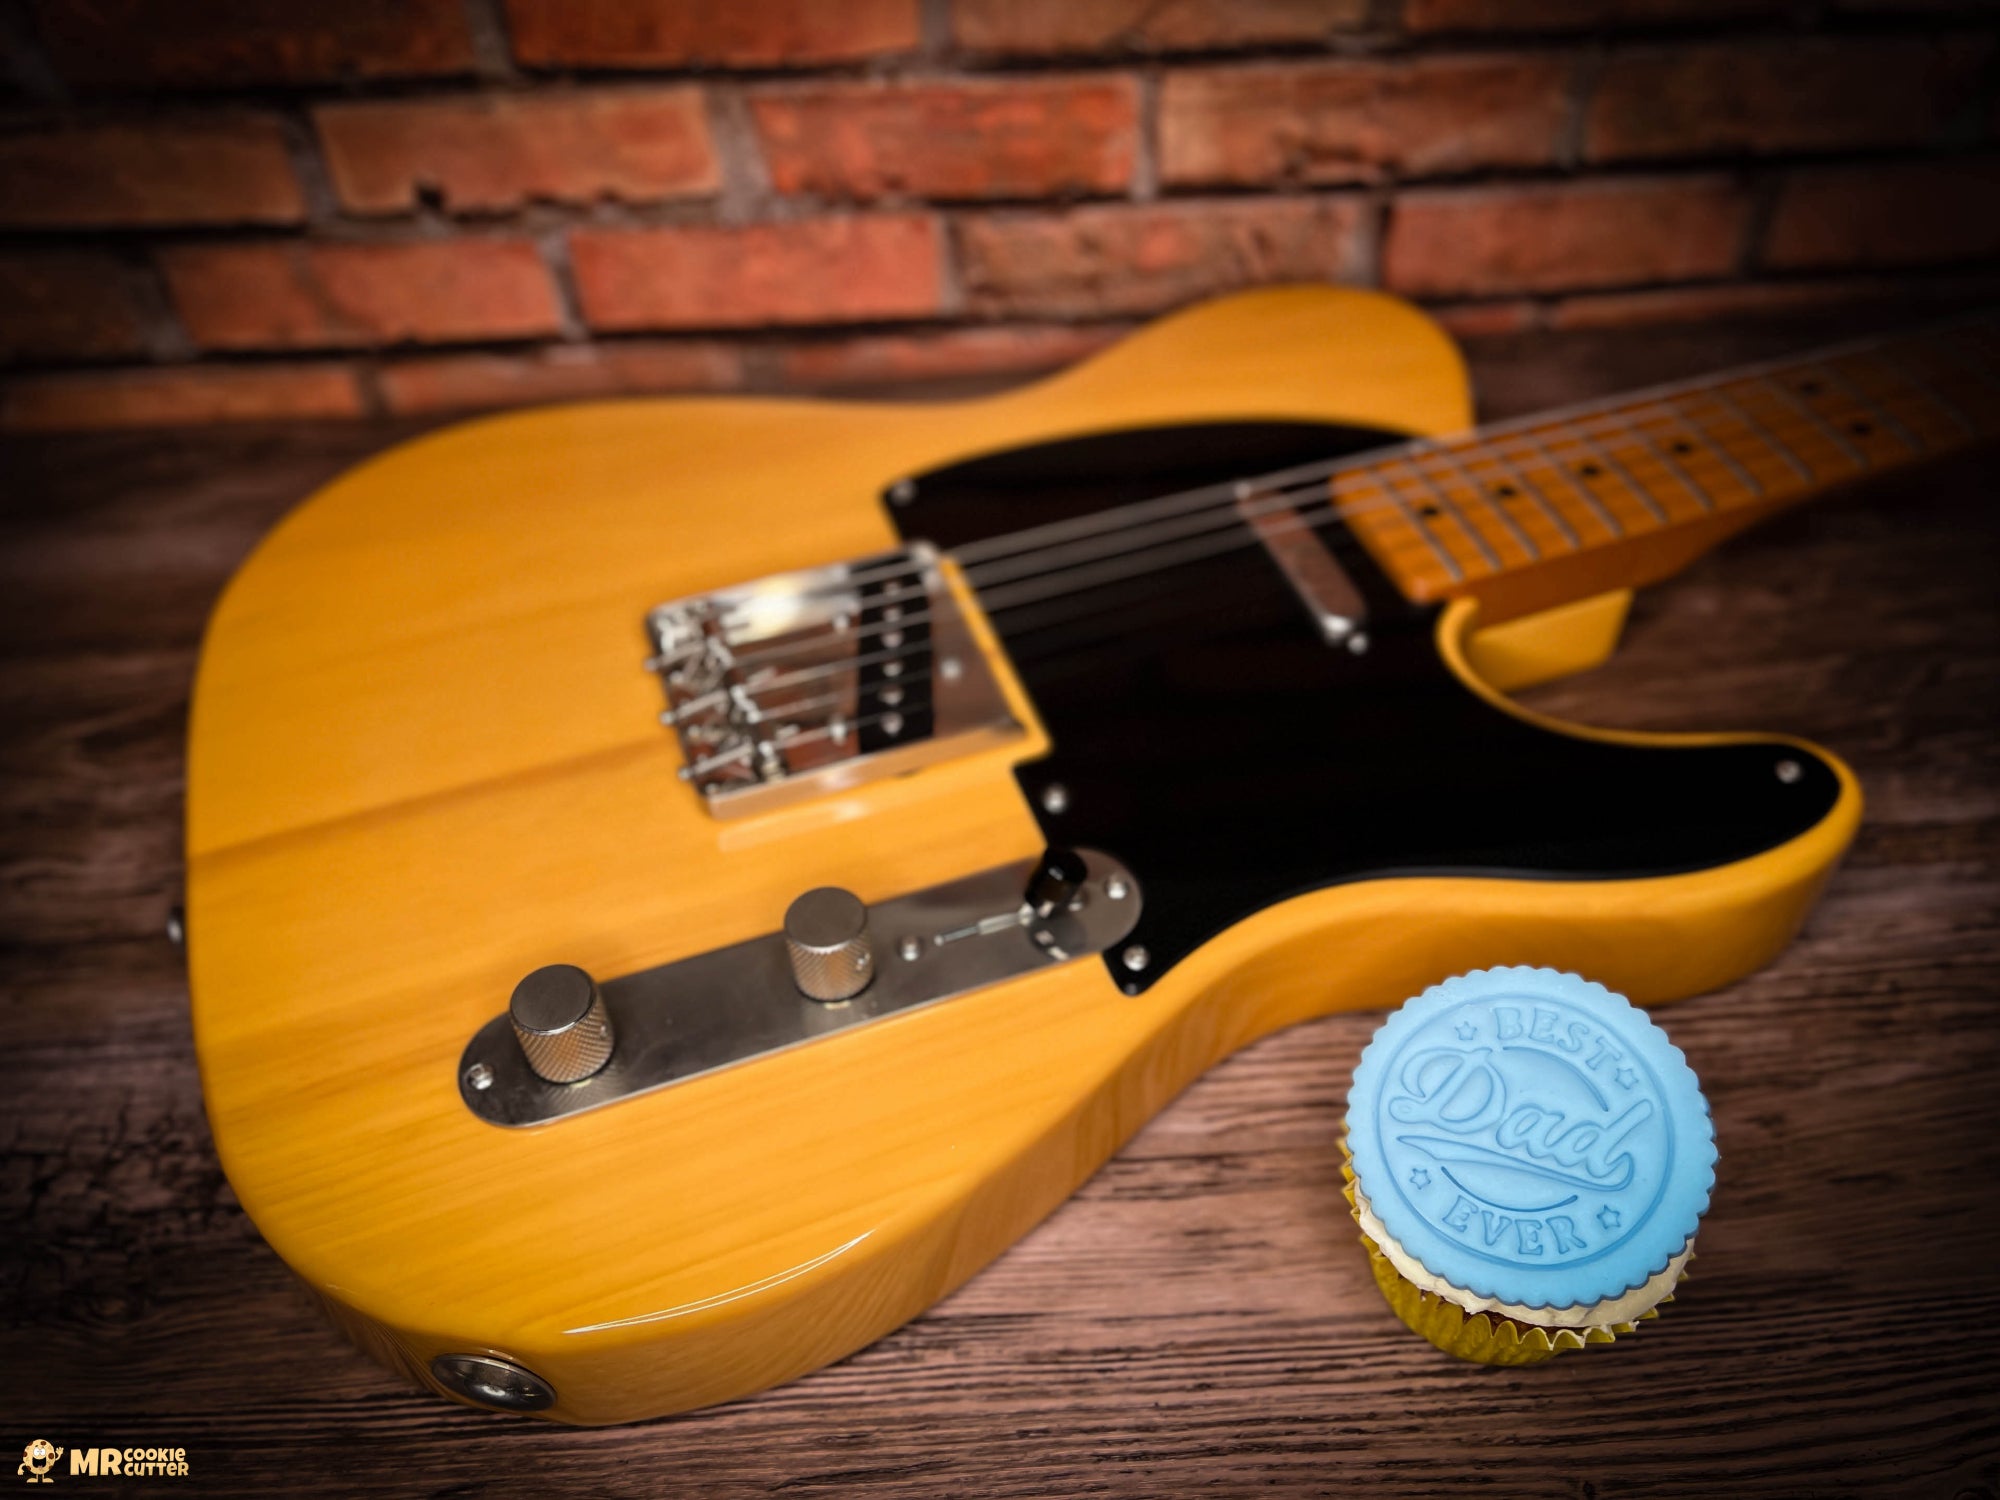 Fathers Day cupcake topper fondant stamps with a yellow guitar on a wood bench